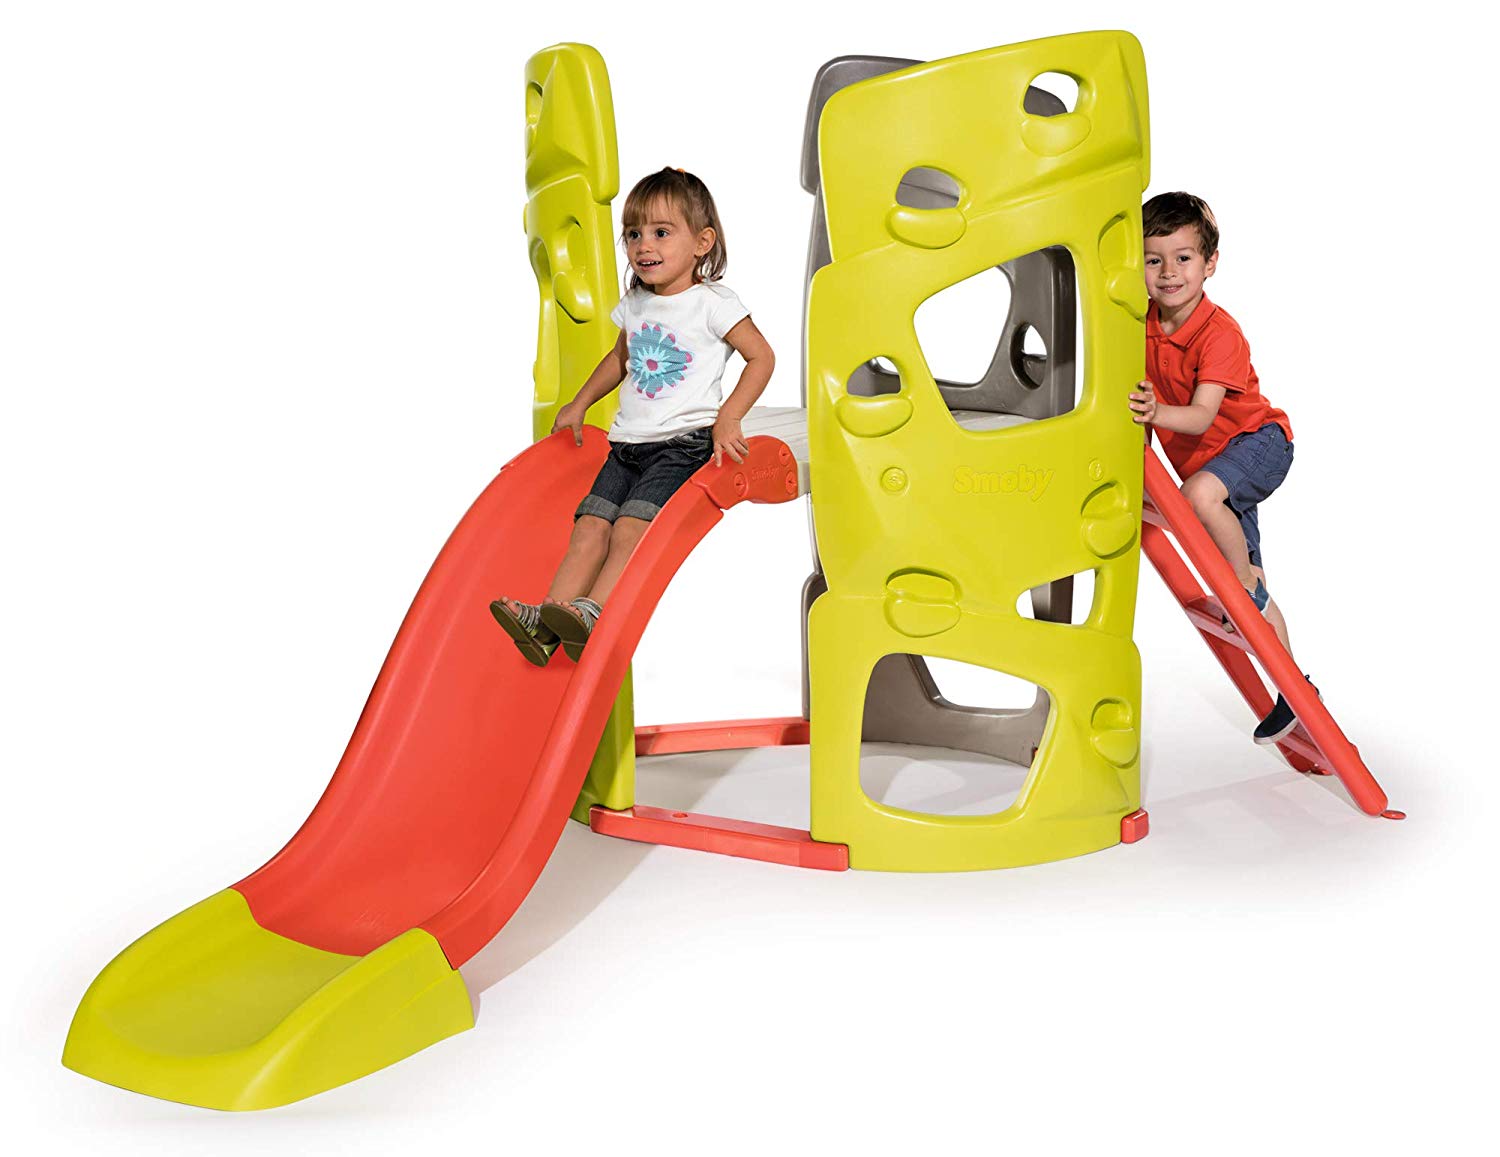 Smoby Area activities With a Slide, Tower Climbing II (840204) Climbing Tow